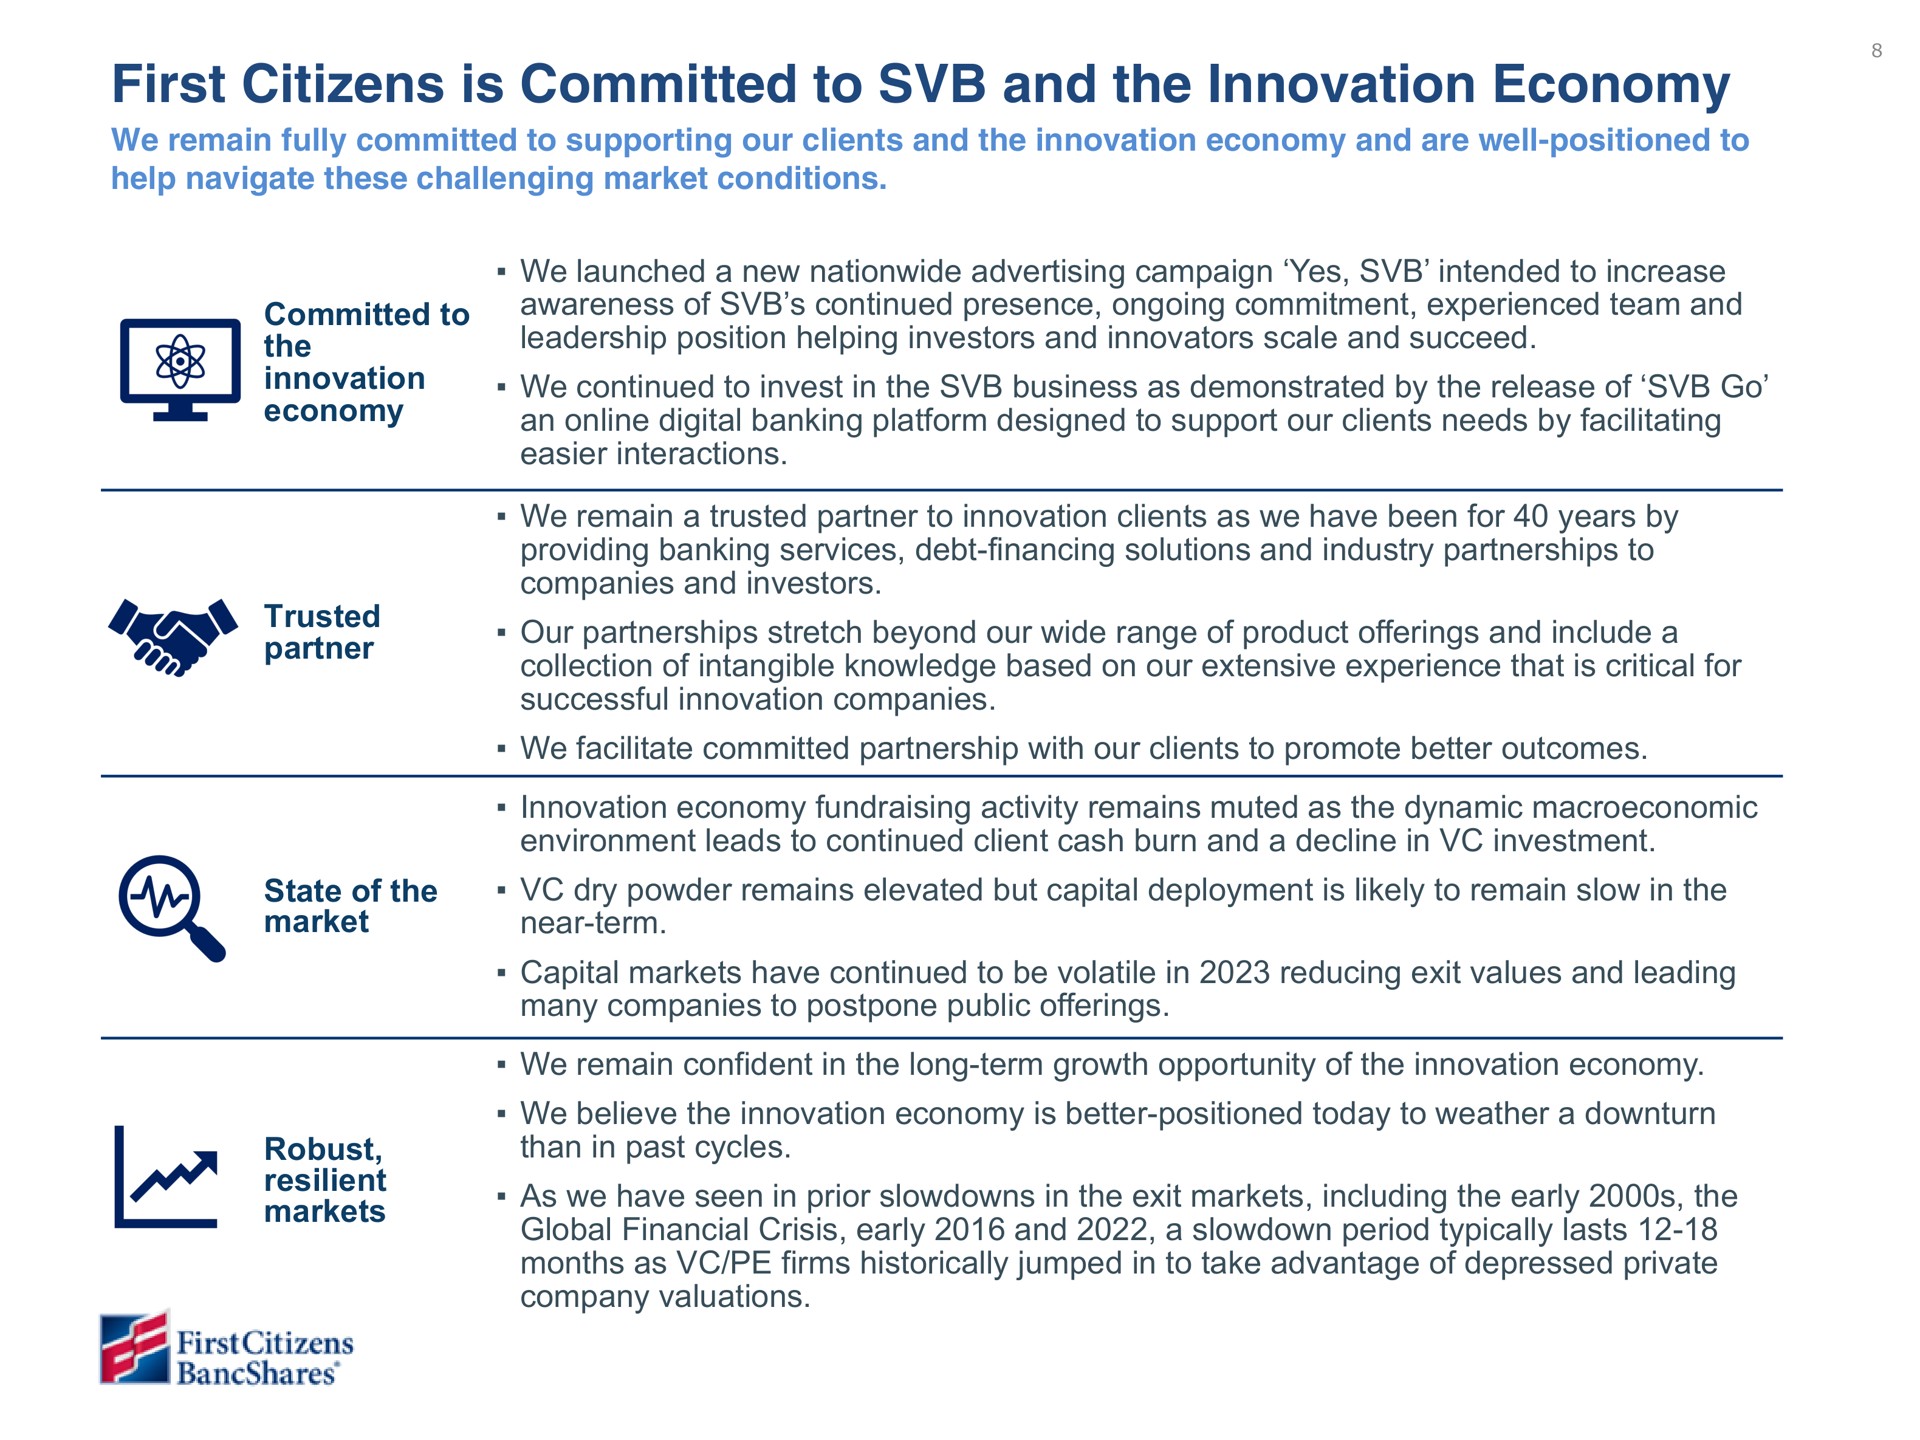 first citizens is committed to and the innovation economy a a trusted | First Citizens BancShares